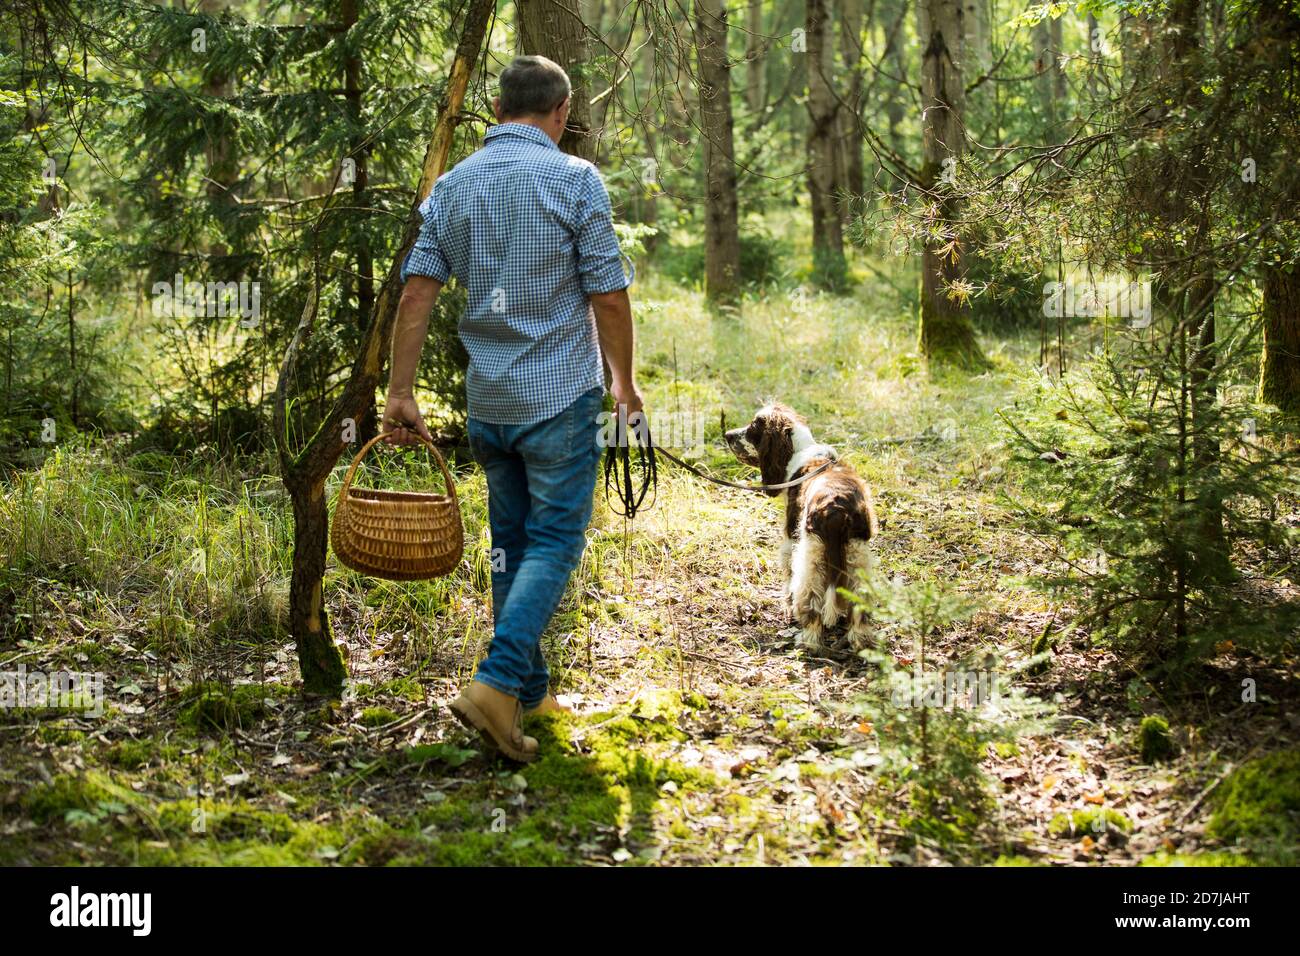 Mature man walking with dog looking for mushroom in forest Stock Photo